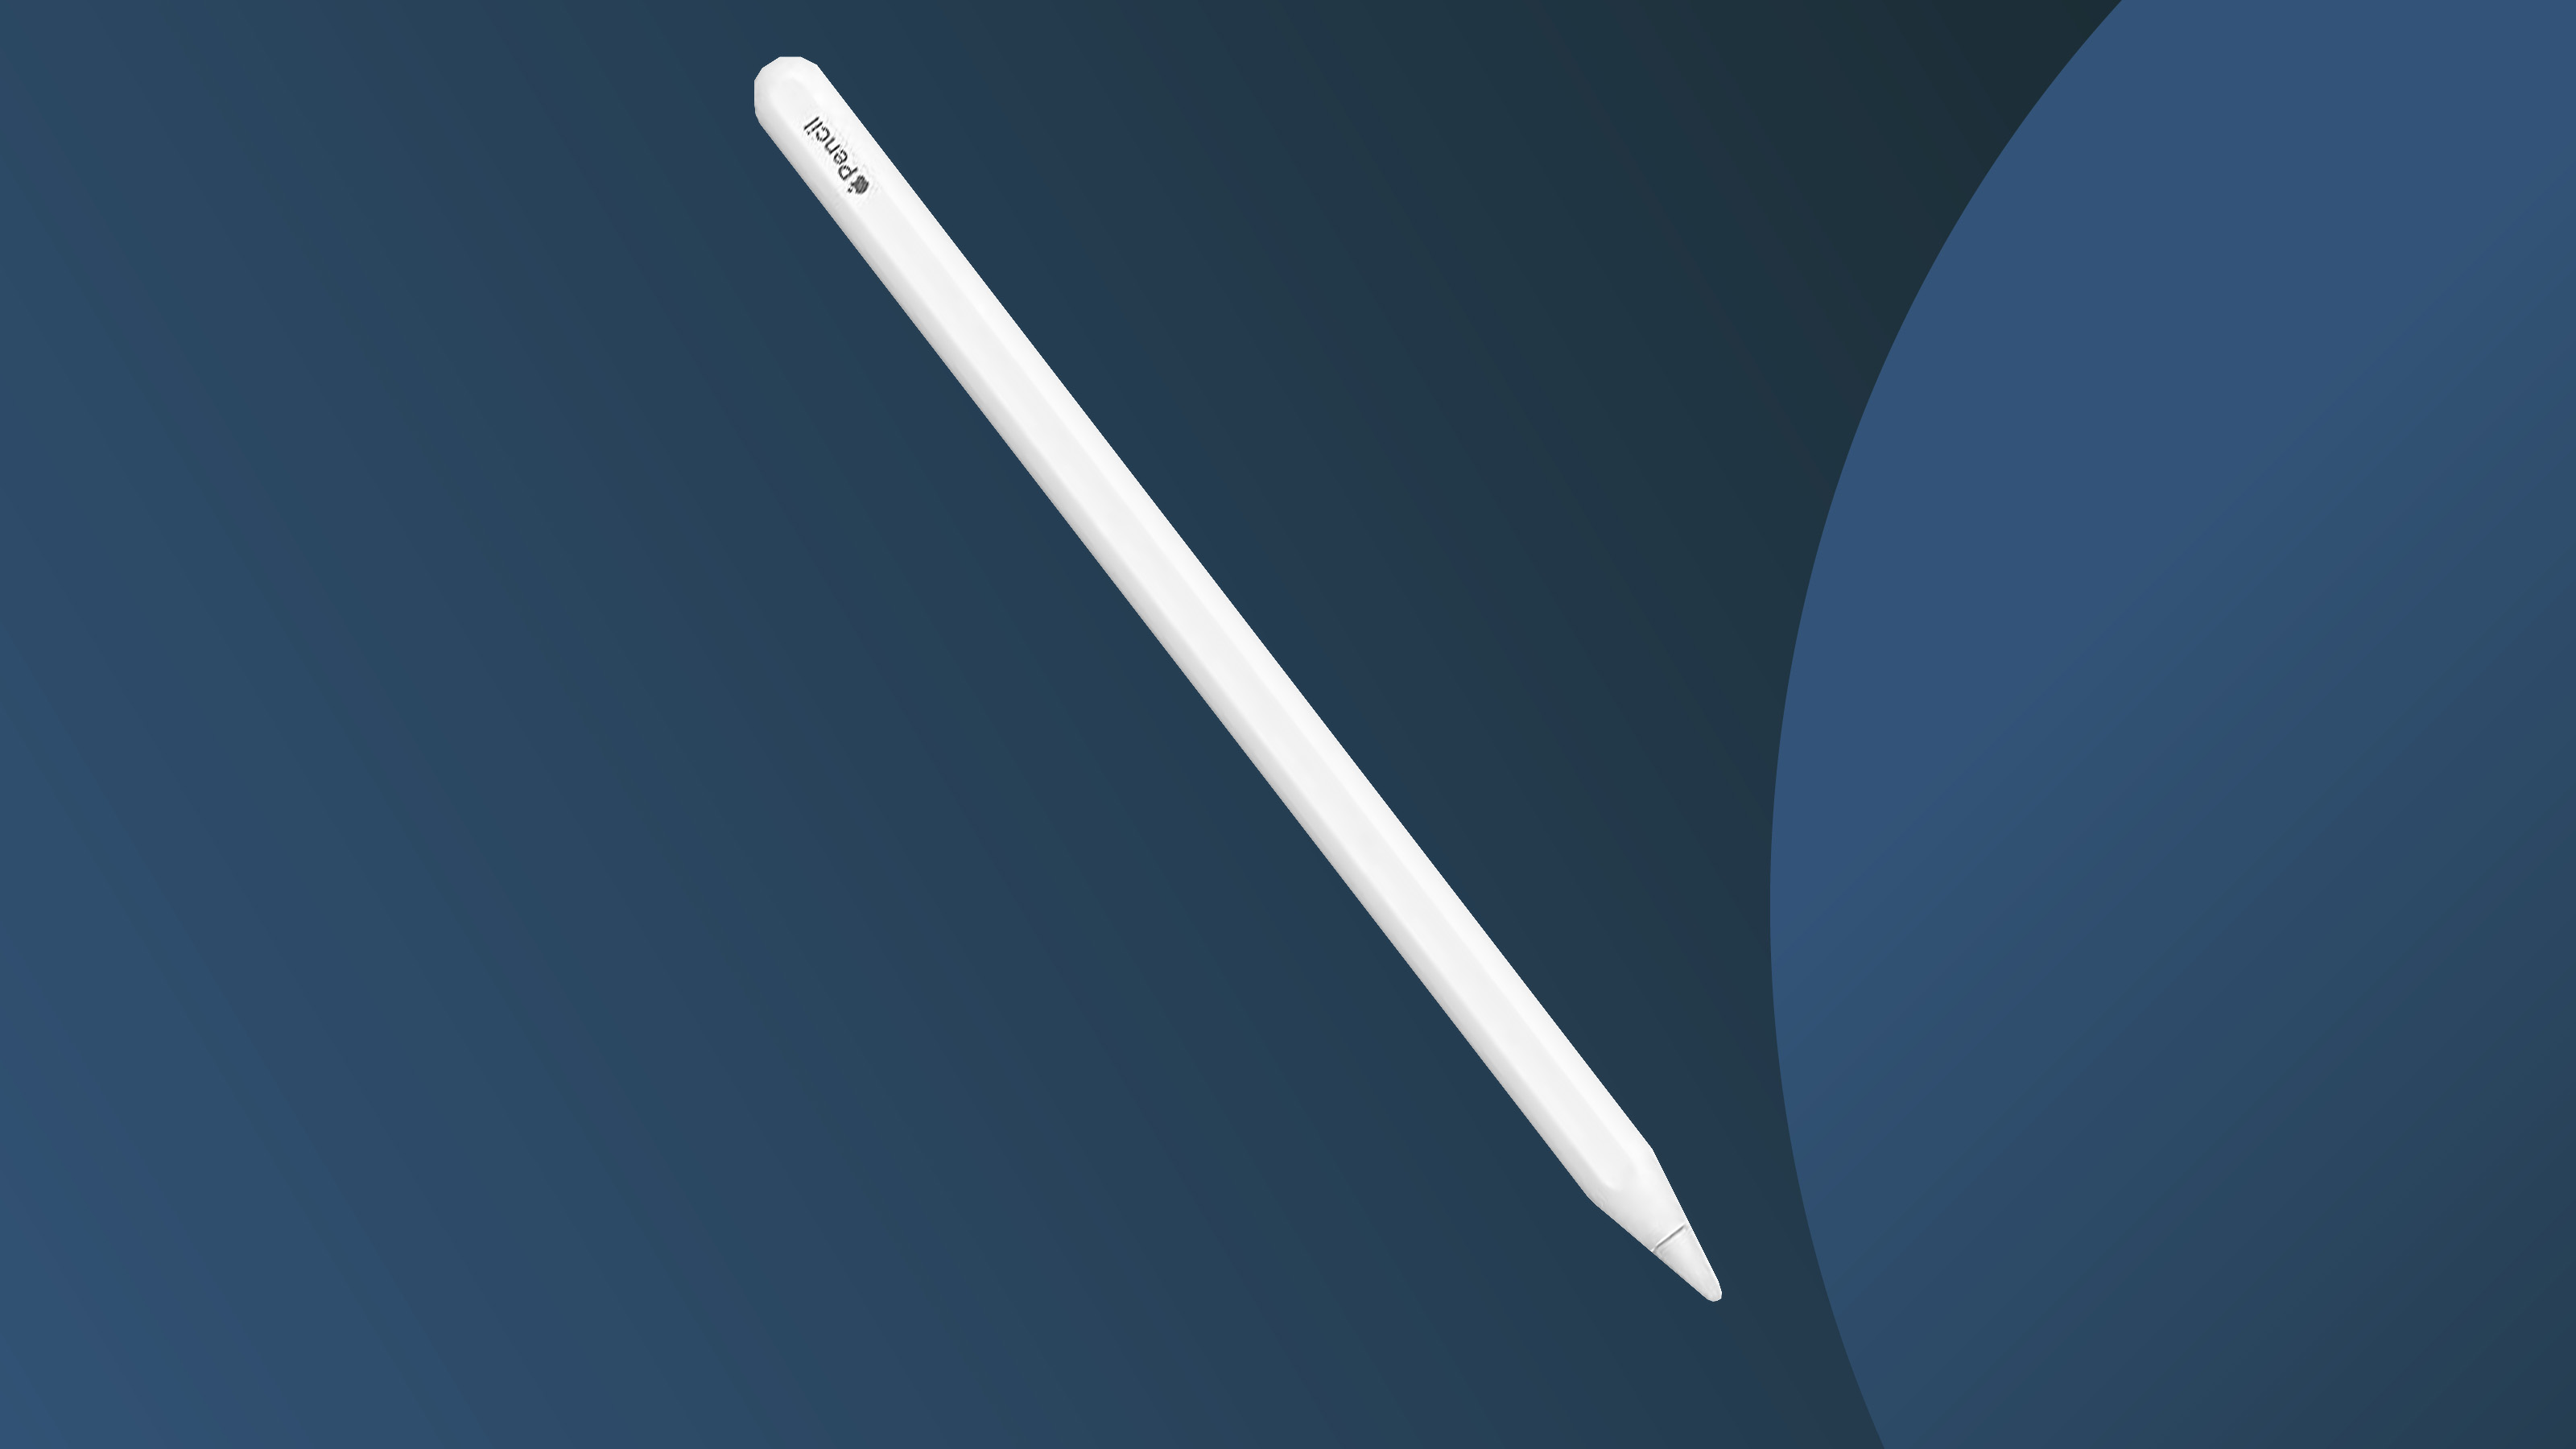 product shot of the Apple Pencil 2nd generation on a dark background